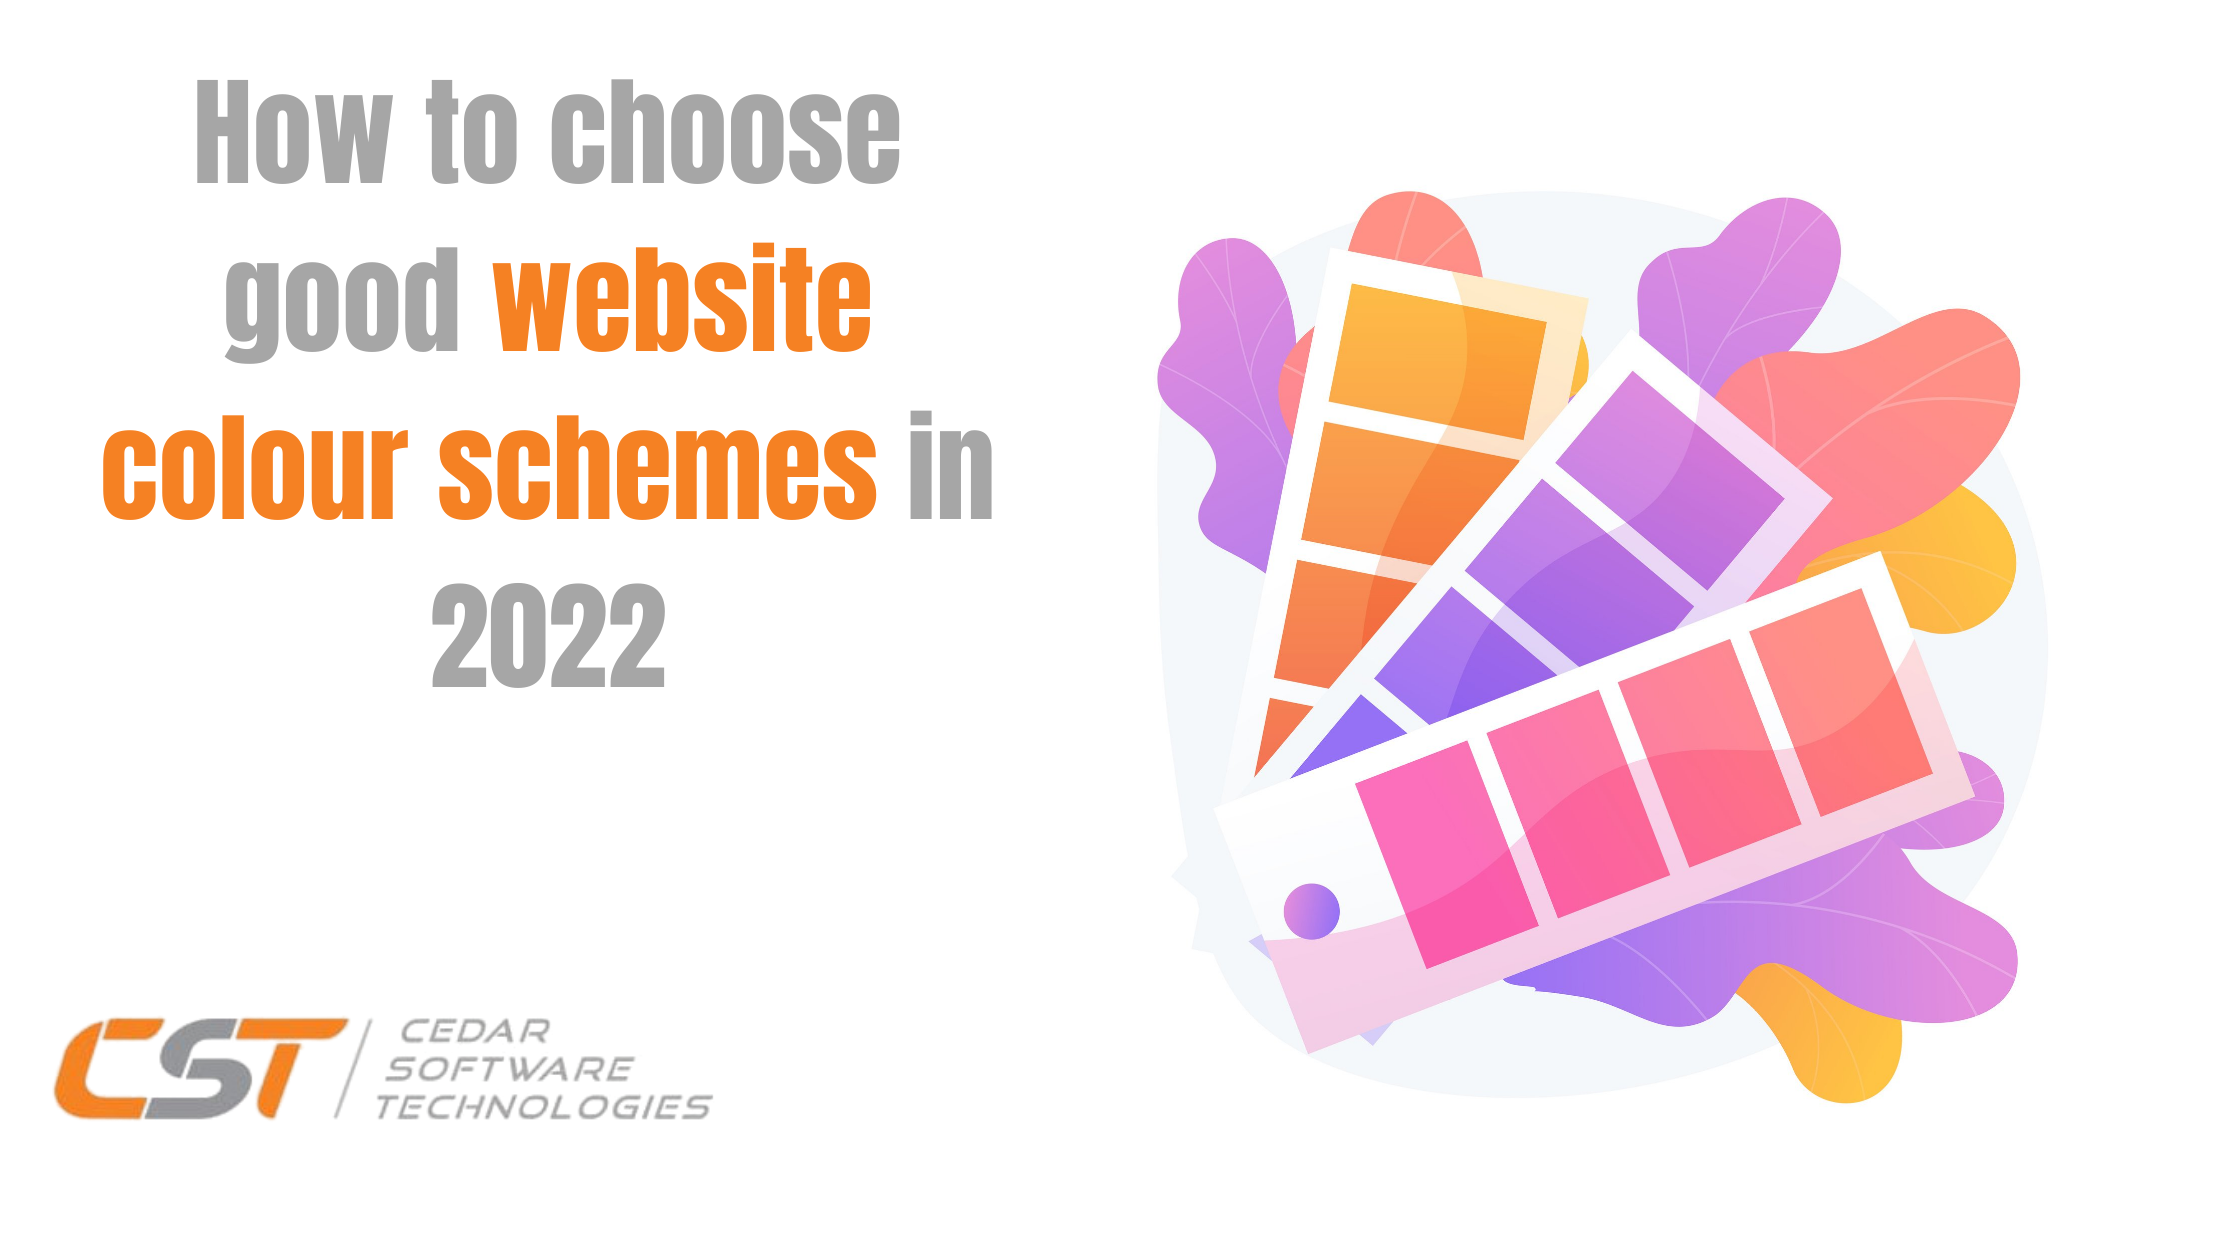 How to choose good website colour schemes in 2022?